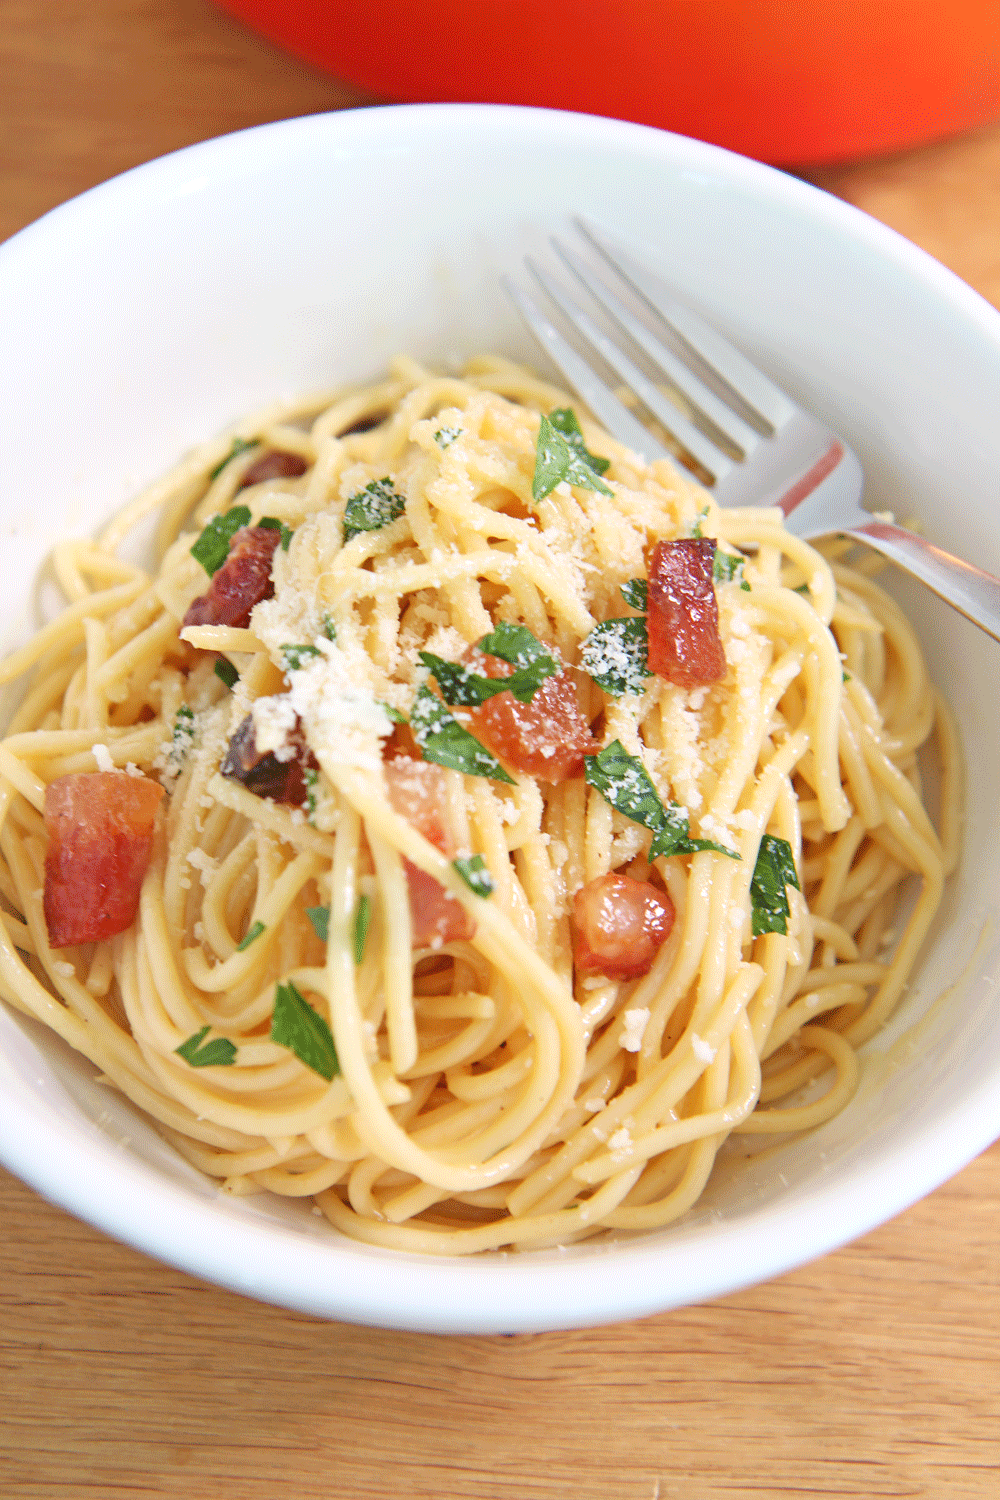 How To Make Carbonara at Home. This is a super easy one pot recipe that most ingredients you have in your fridge and pantry. Pasta, bacon, eggs and cheese are the main ingredients. You can also substitute bacon for pancetta, or guanciale. This is such an easy pasta recipe and hope you make this for dinner! www.Chophappy.com #carbonara #easypastarecipe